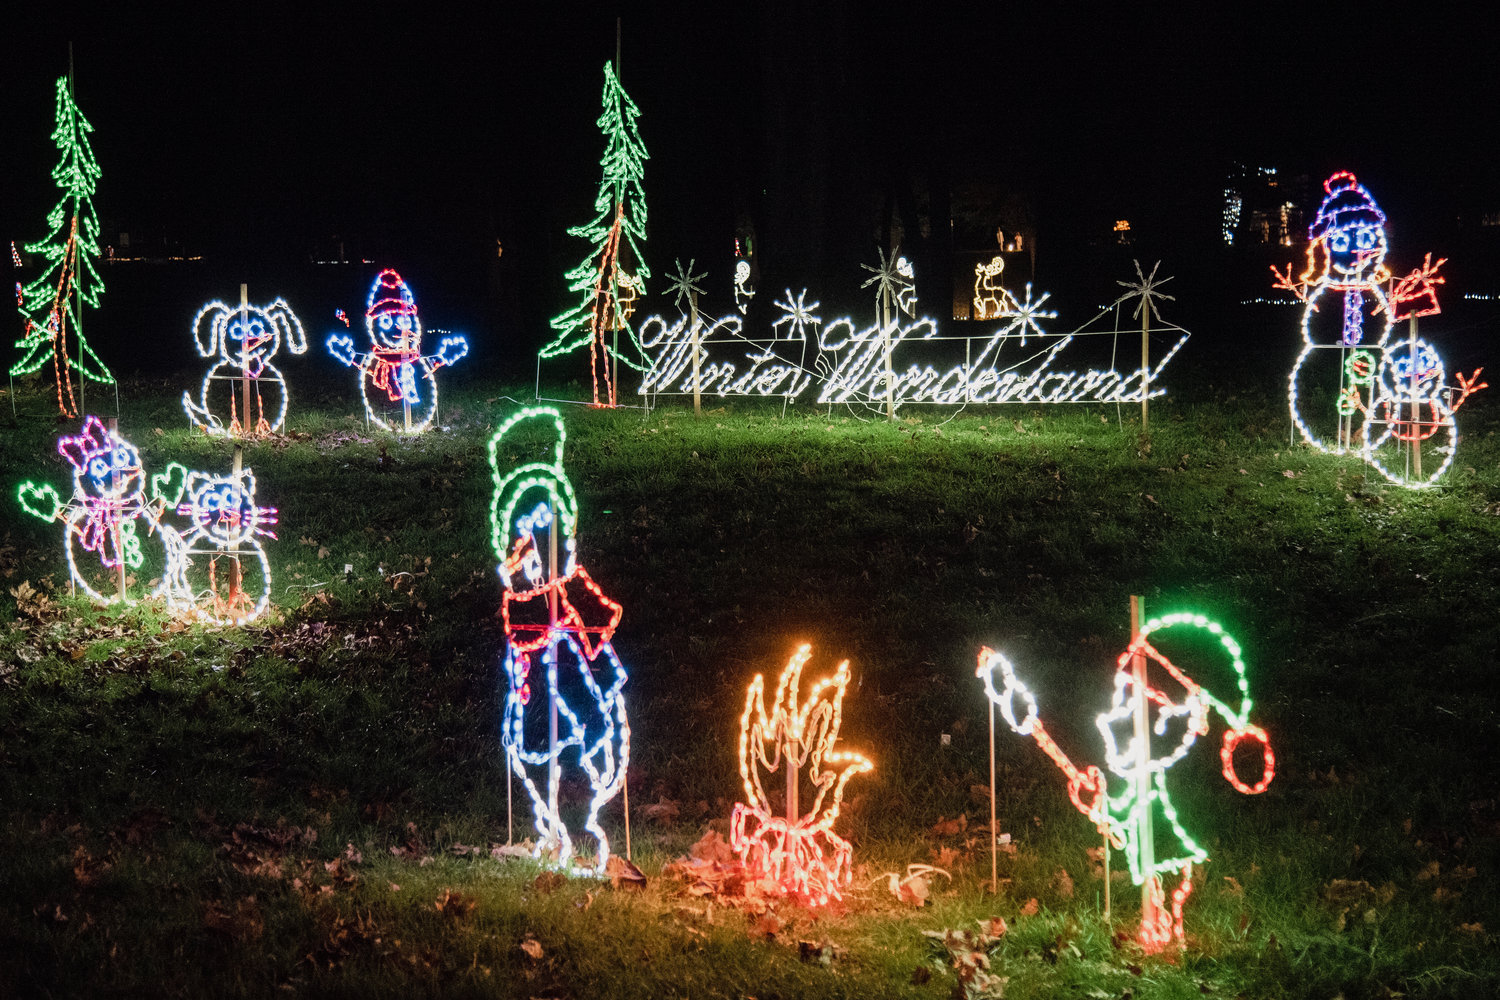 Lights illuminate characters and the words “Winter Wonderland” during the Christmas lights drive-through at Fort Borst Park in Centralia.